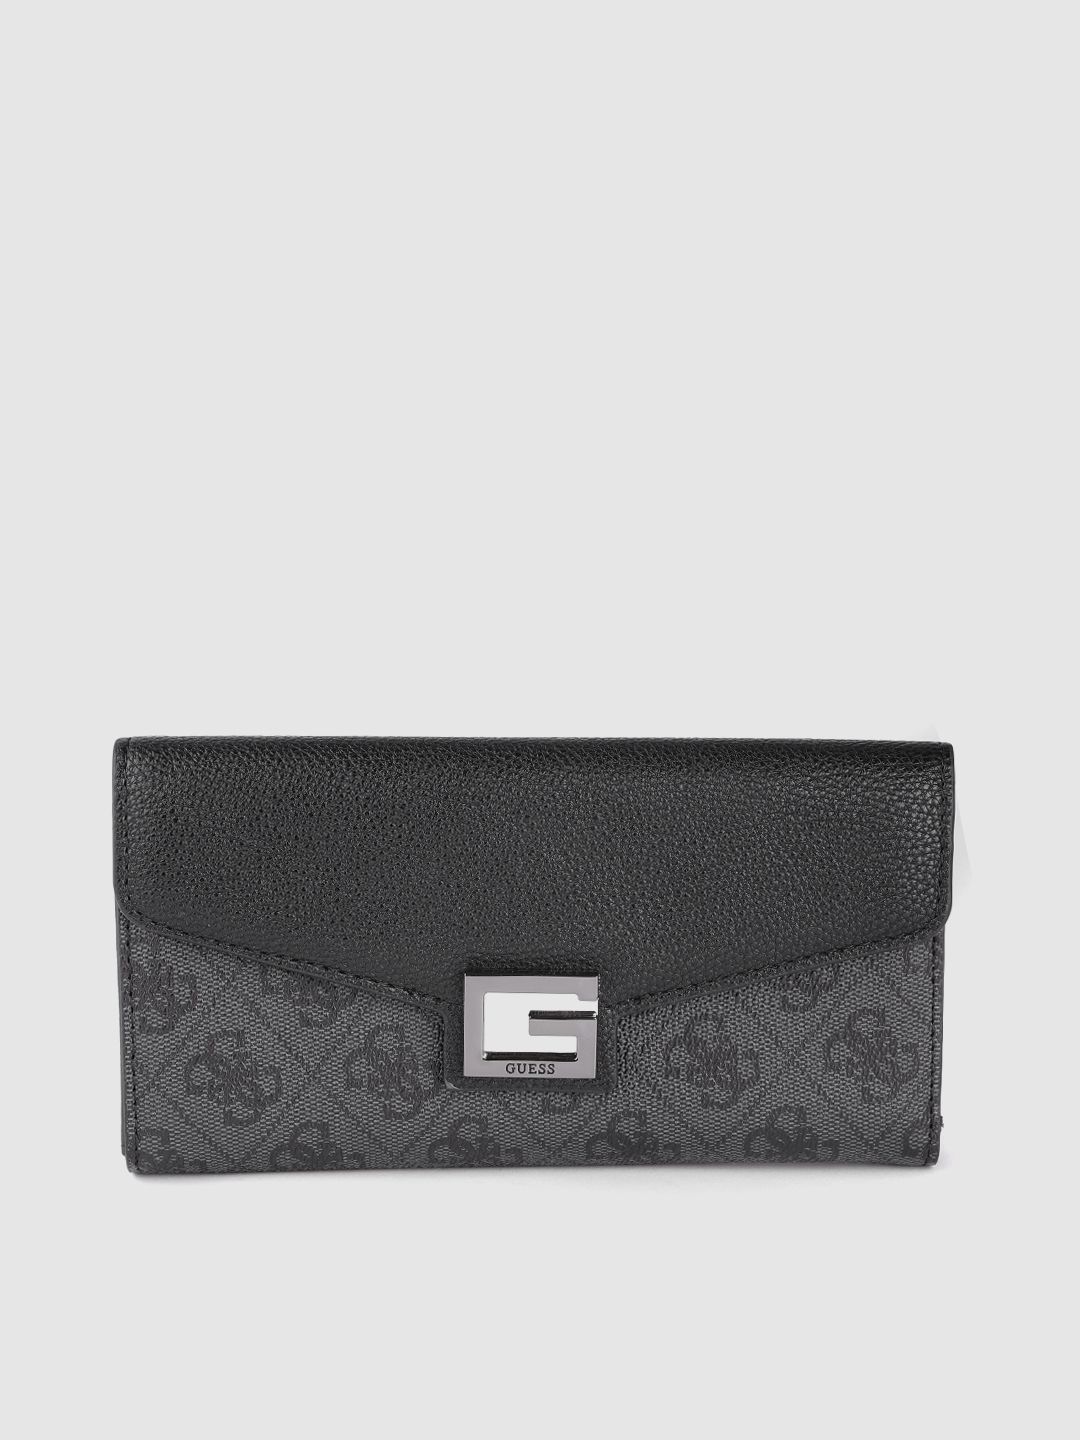 GUESS Women Black & Charcoal Grey Brand Logo Print Two Fold Wallet Price in India